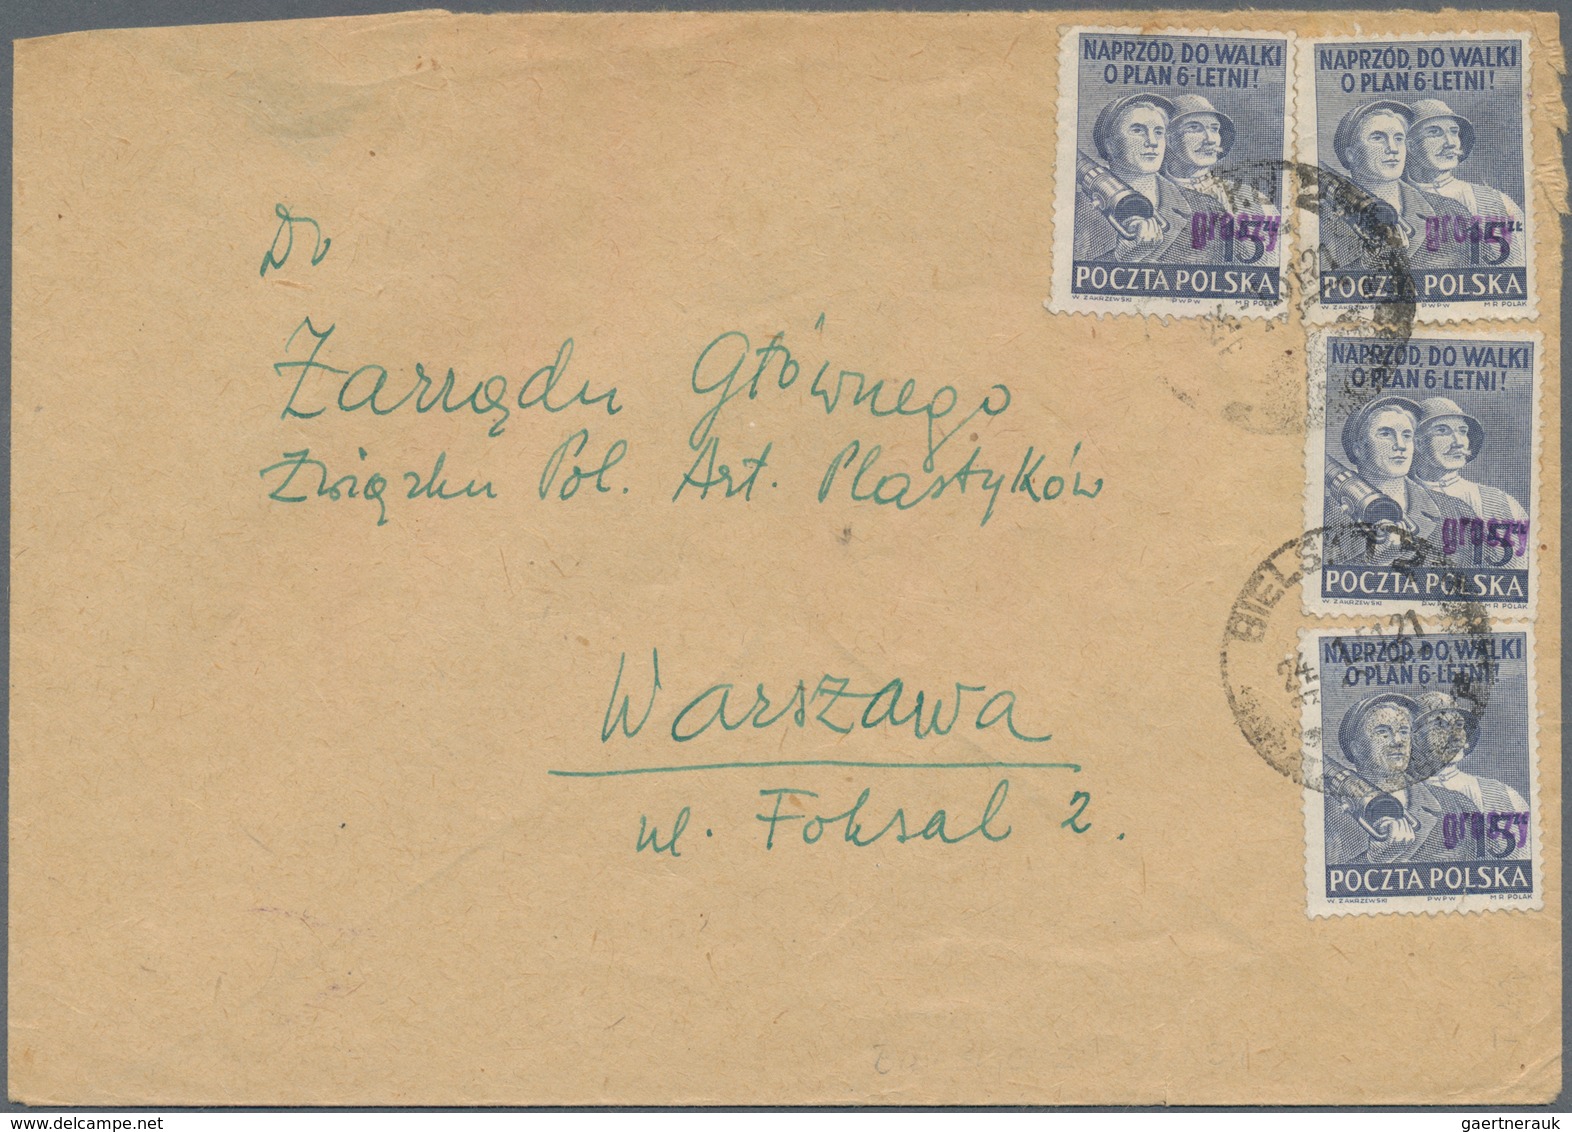 Polen: 1950/1951, Groszy-Overprints, collection of more than 290 covers and many used stamps and pie